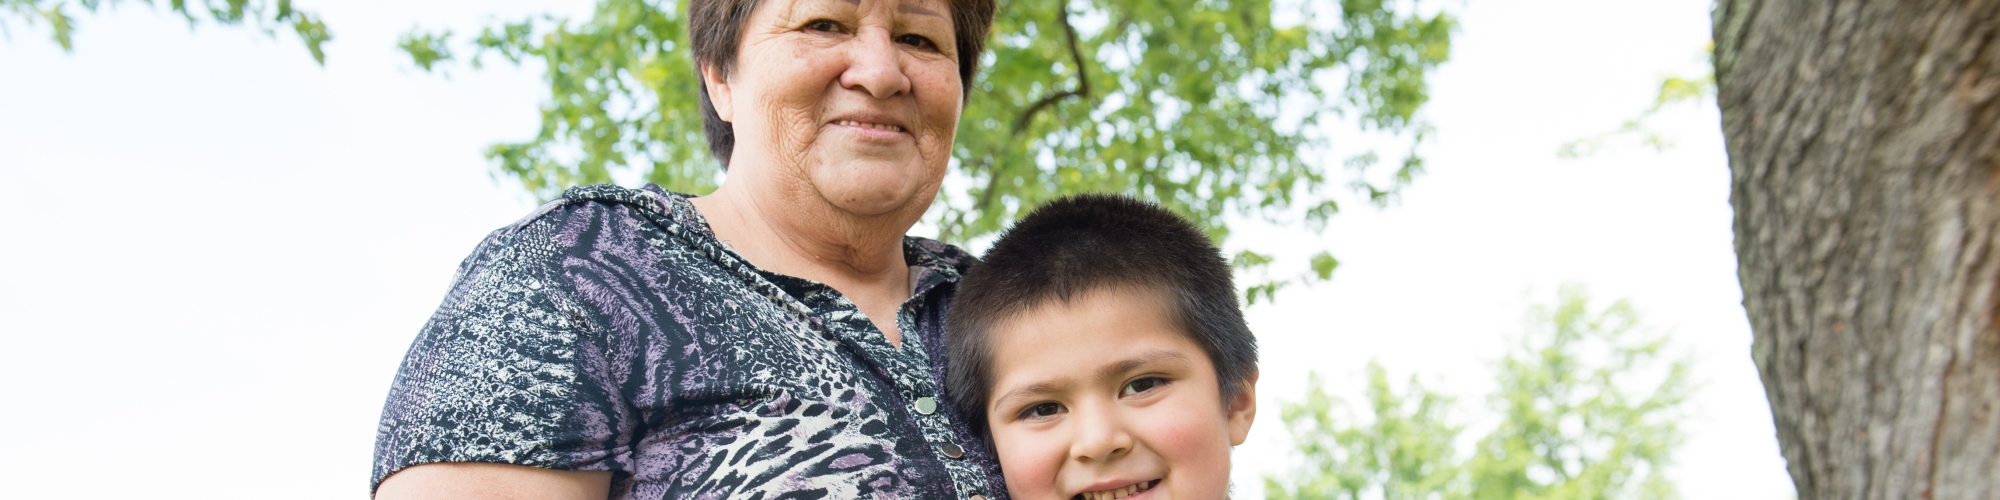 image of a Grandmother with a child